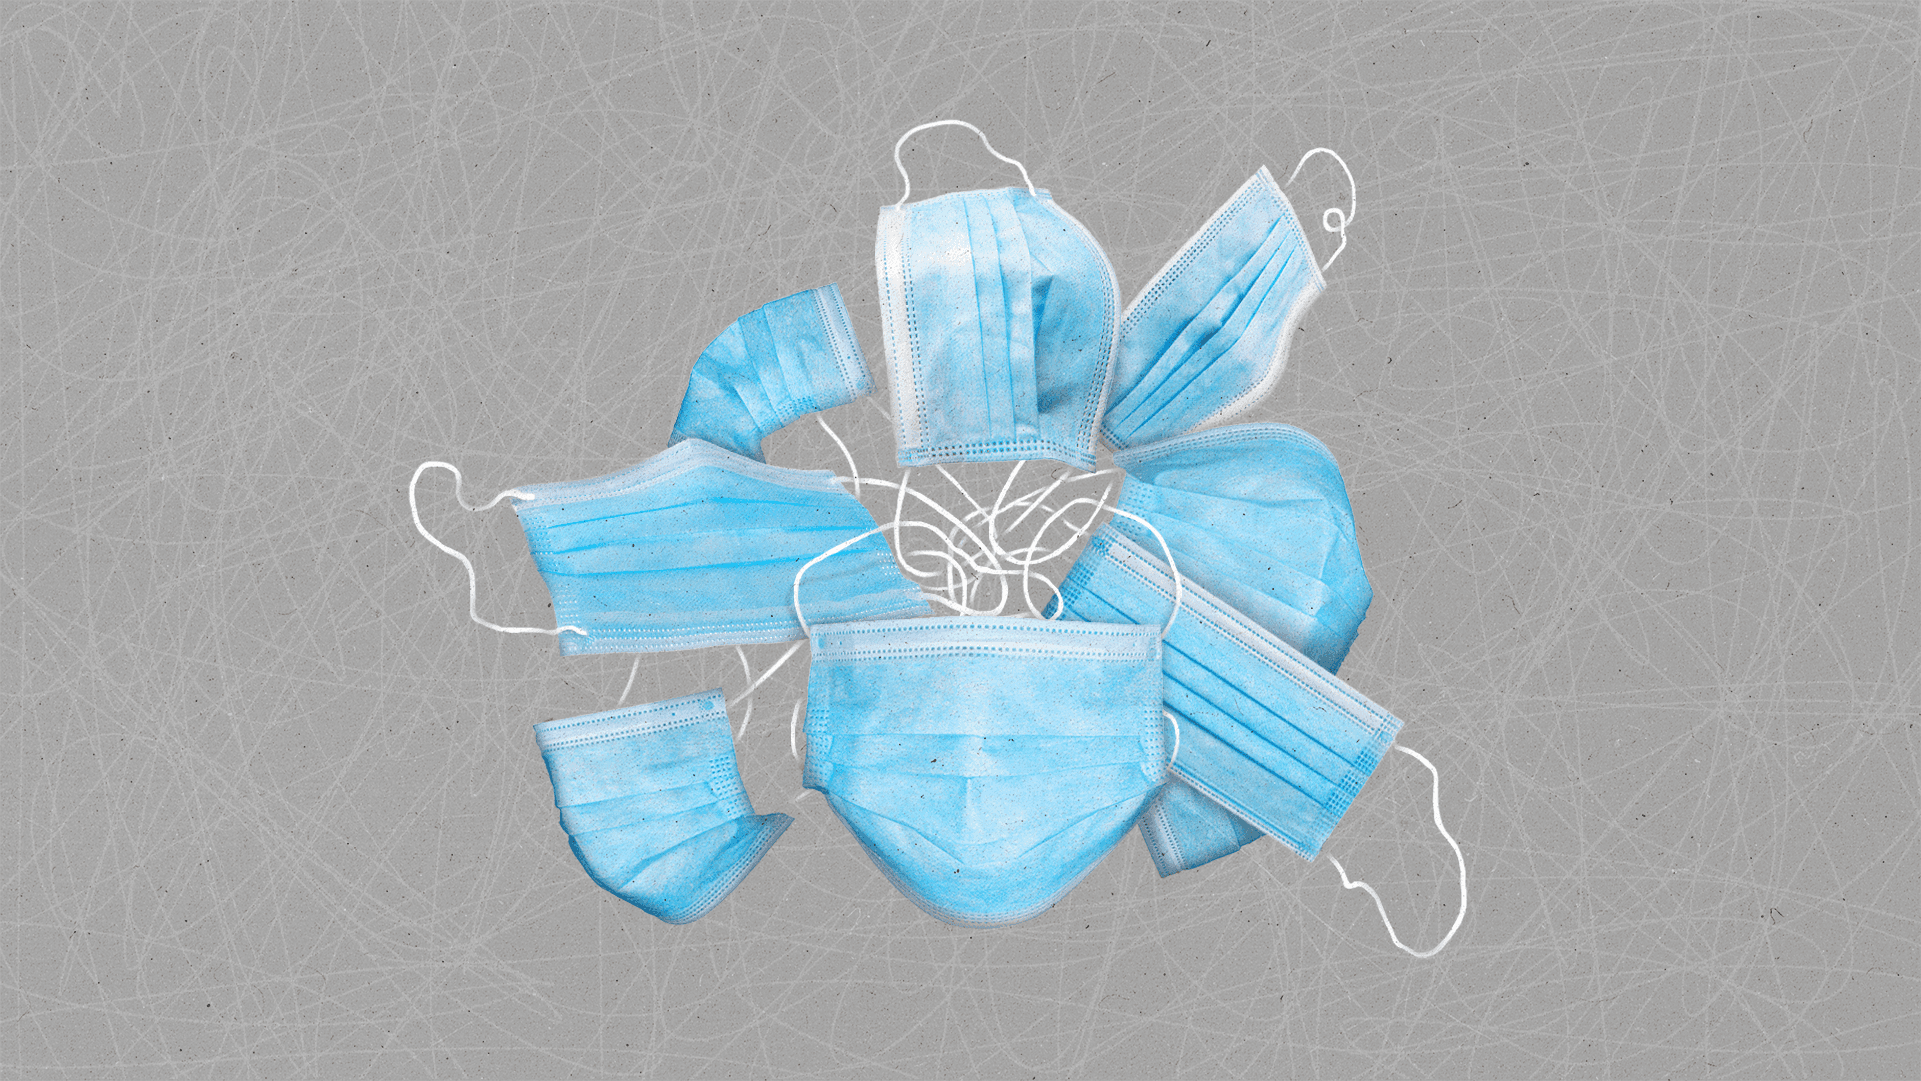 Blue medical masks with their ties knotted and mingled together in a central knot, with white scribbles over a grey background.